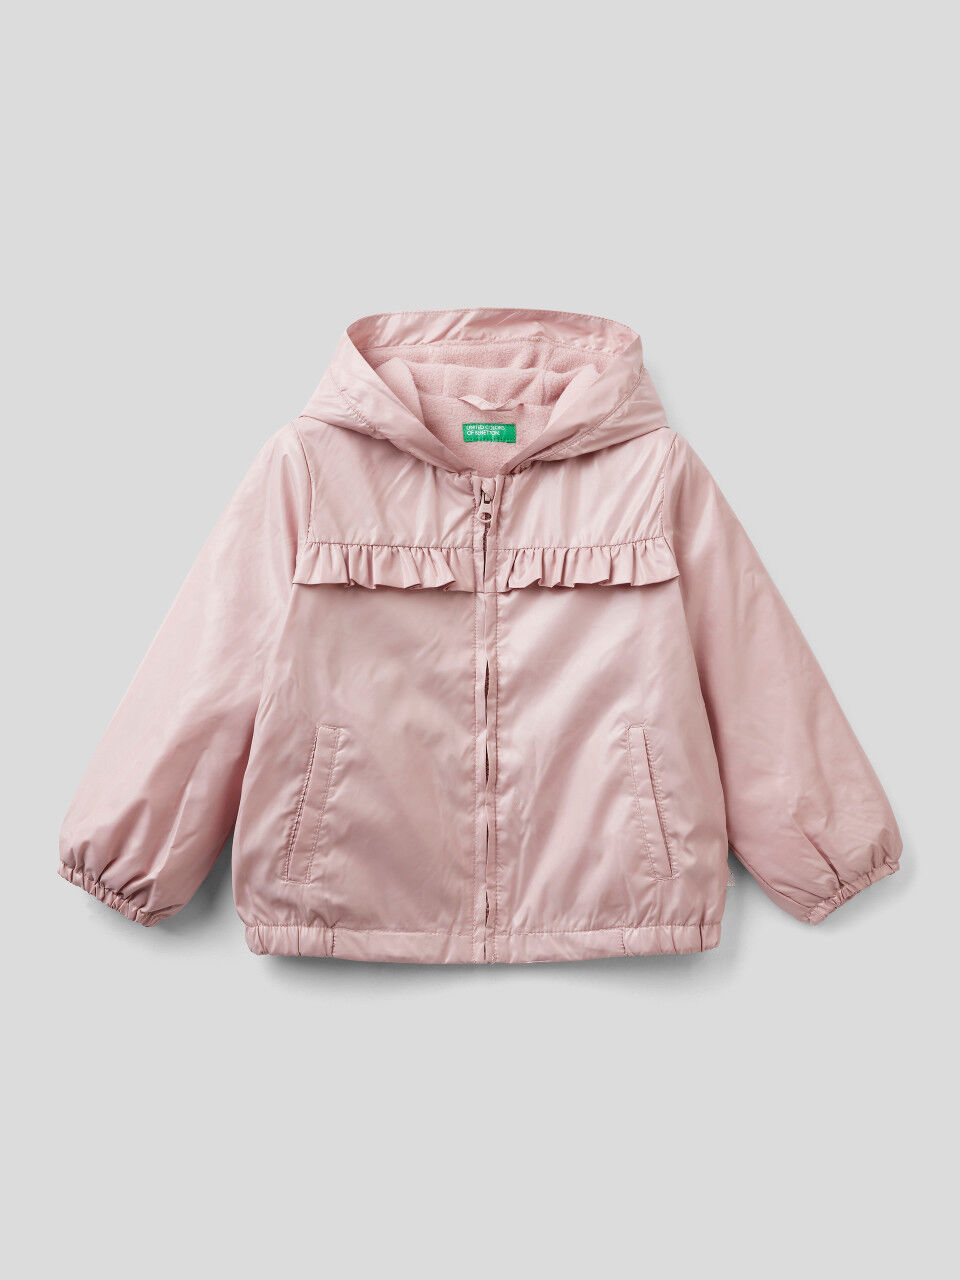 DKNY Baby Girls Midweight Jacket 